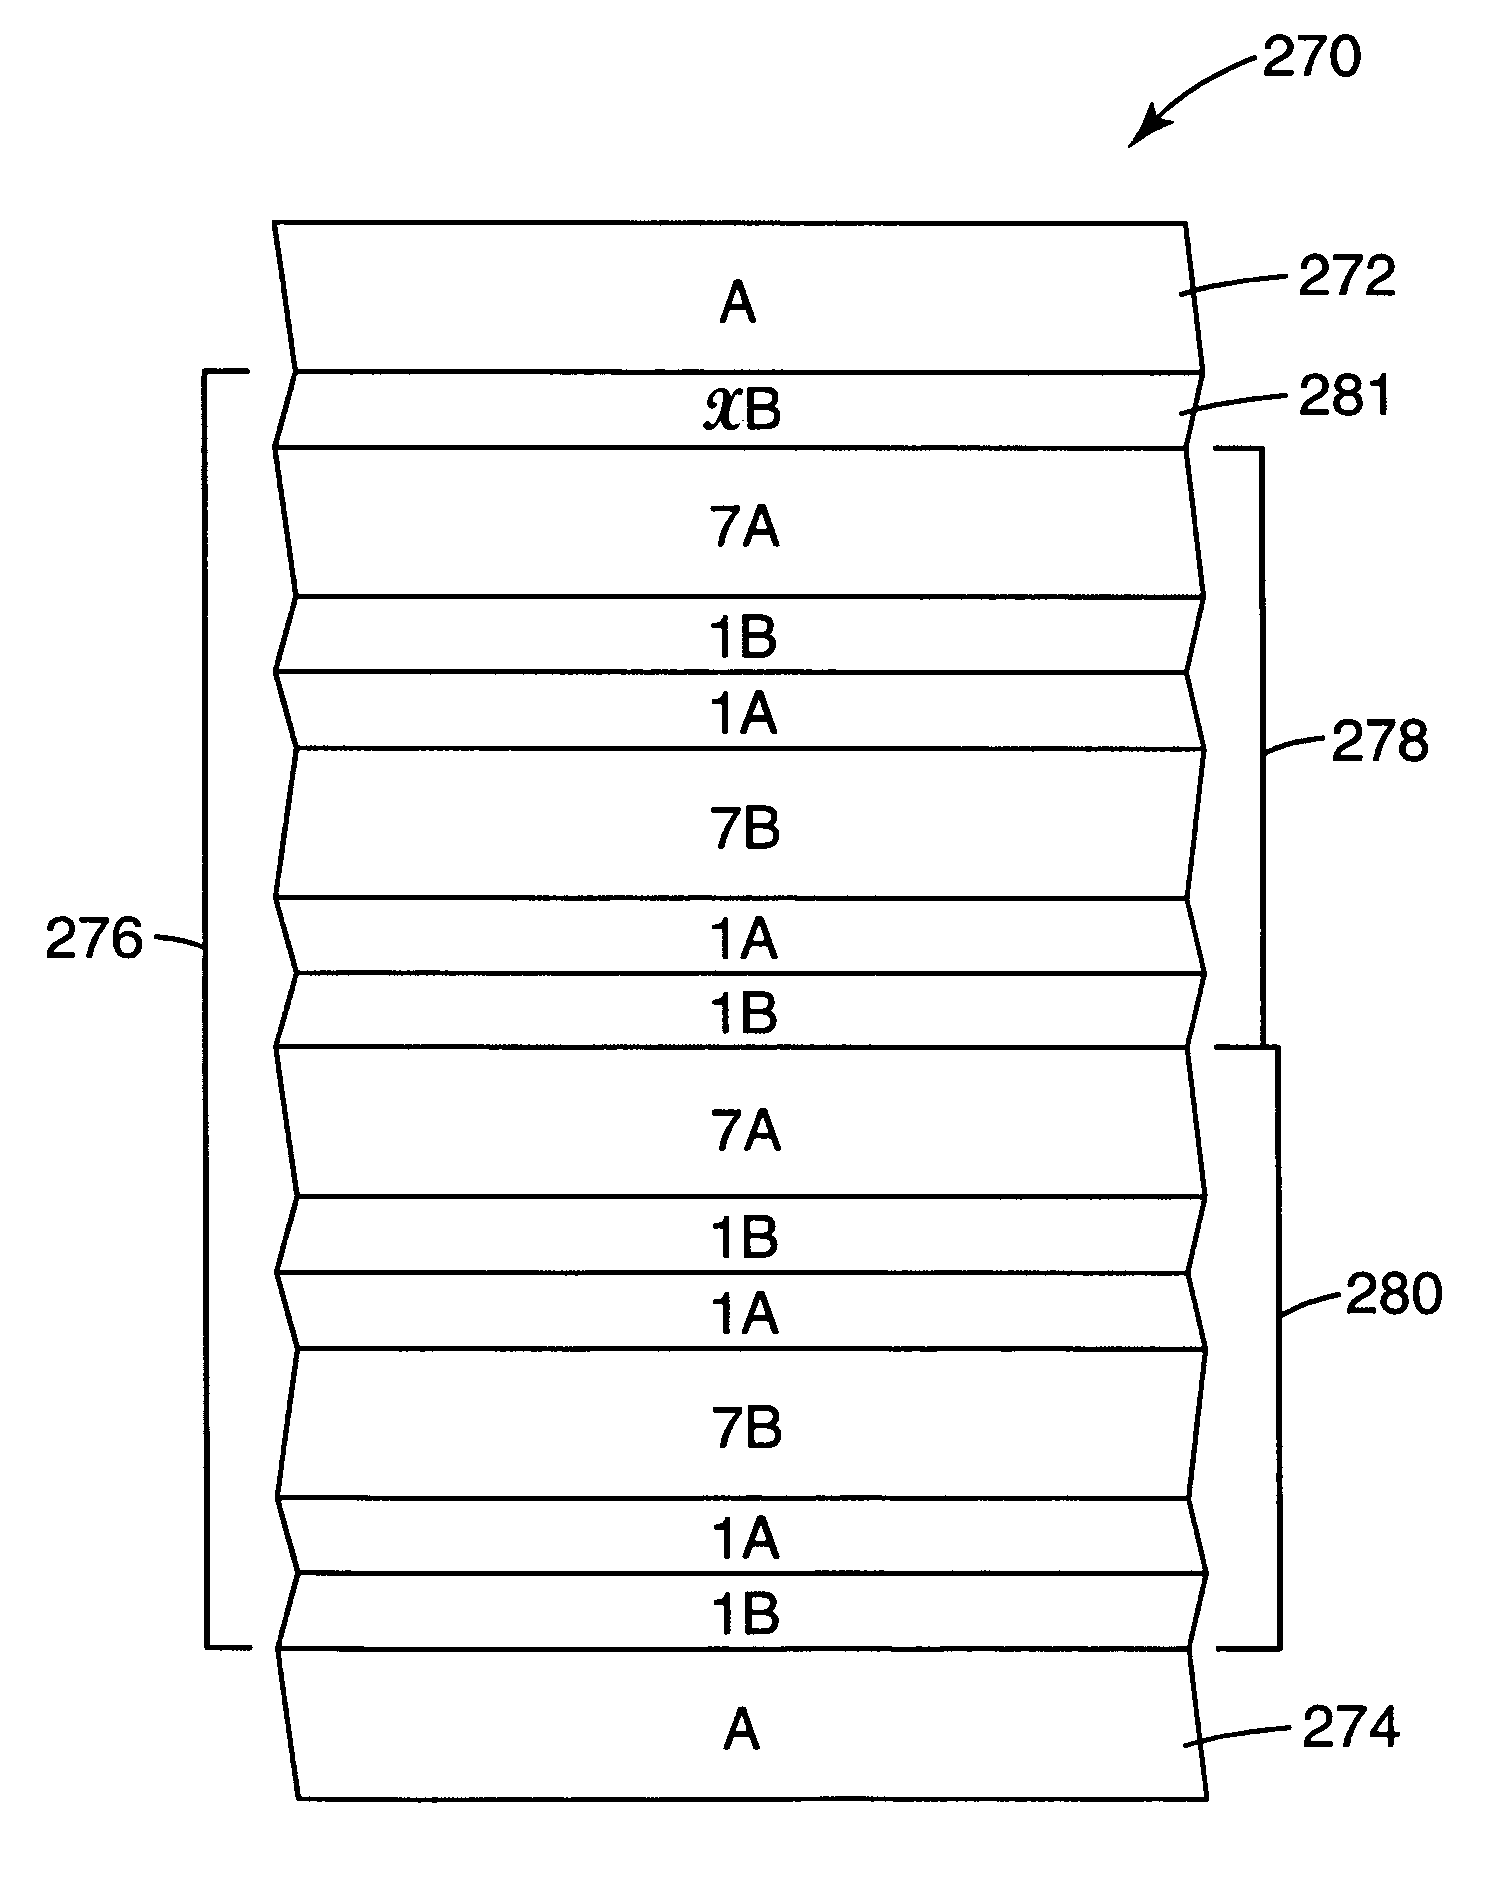 Multilayer infrared reflecting film with high and smooth transmission in visible wavelength region and laminate articles made therefrom